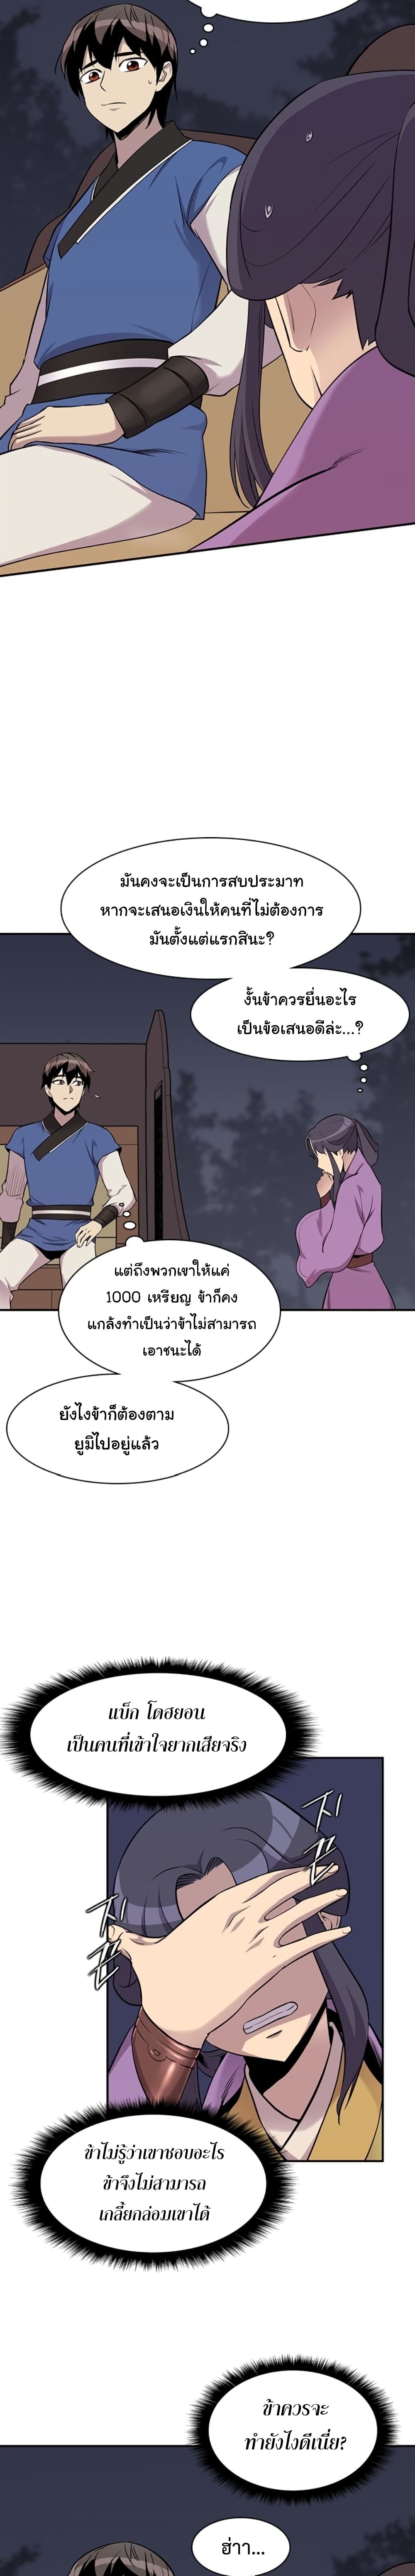 The Strongest Ever à¸à¸­à¸à¸à¸µà¹ 27 (13)